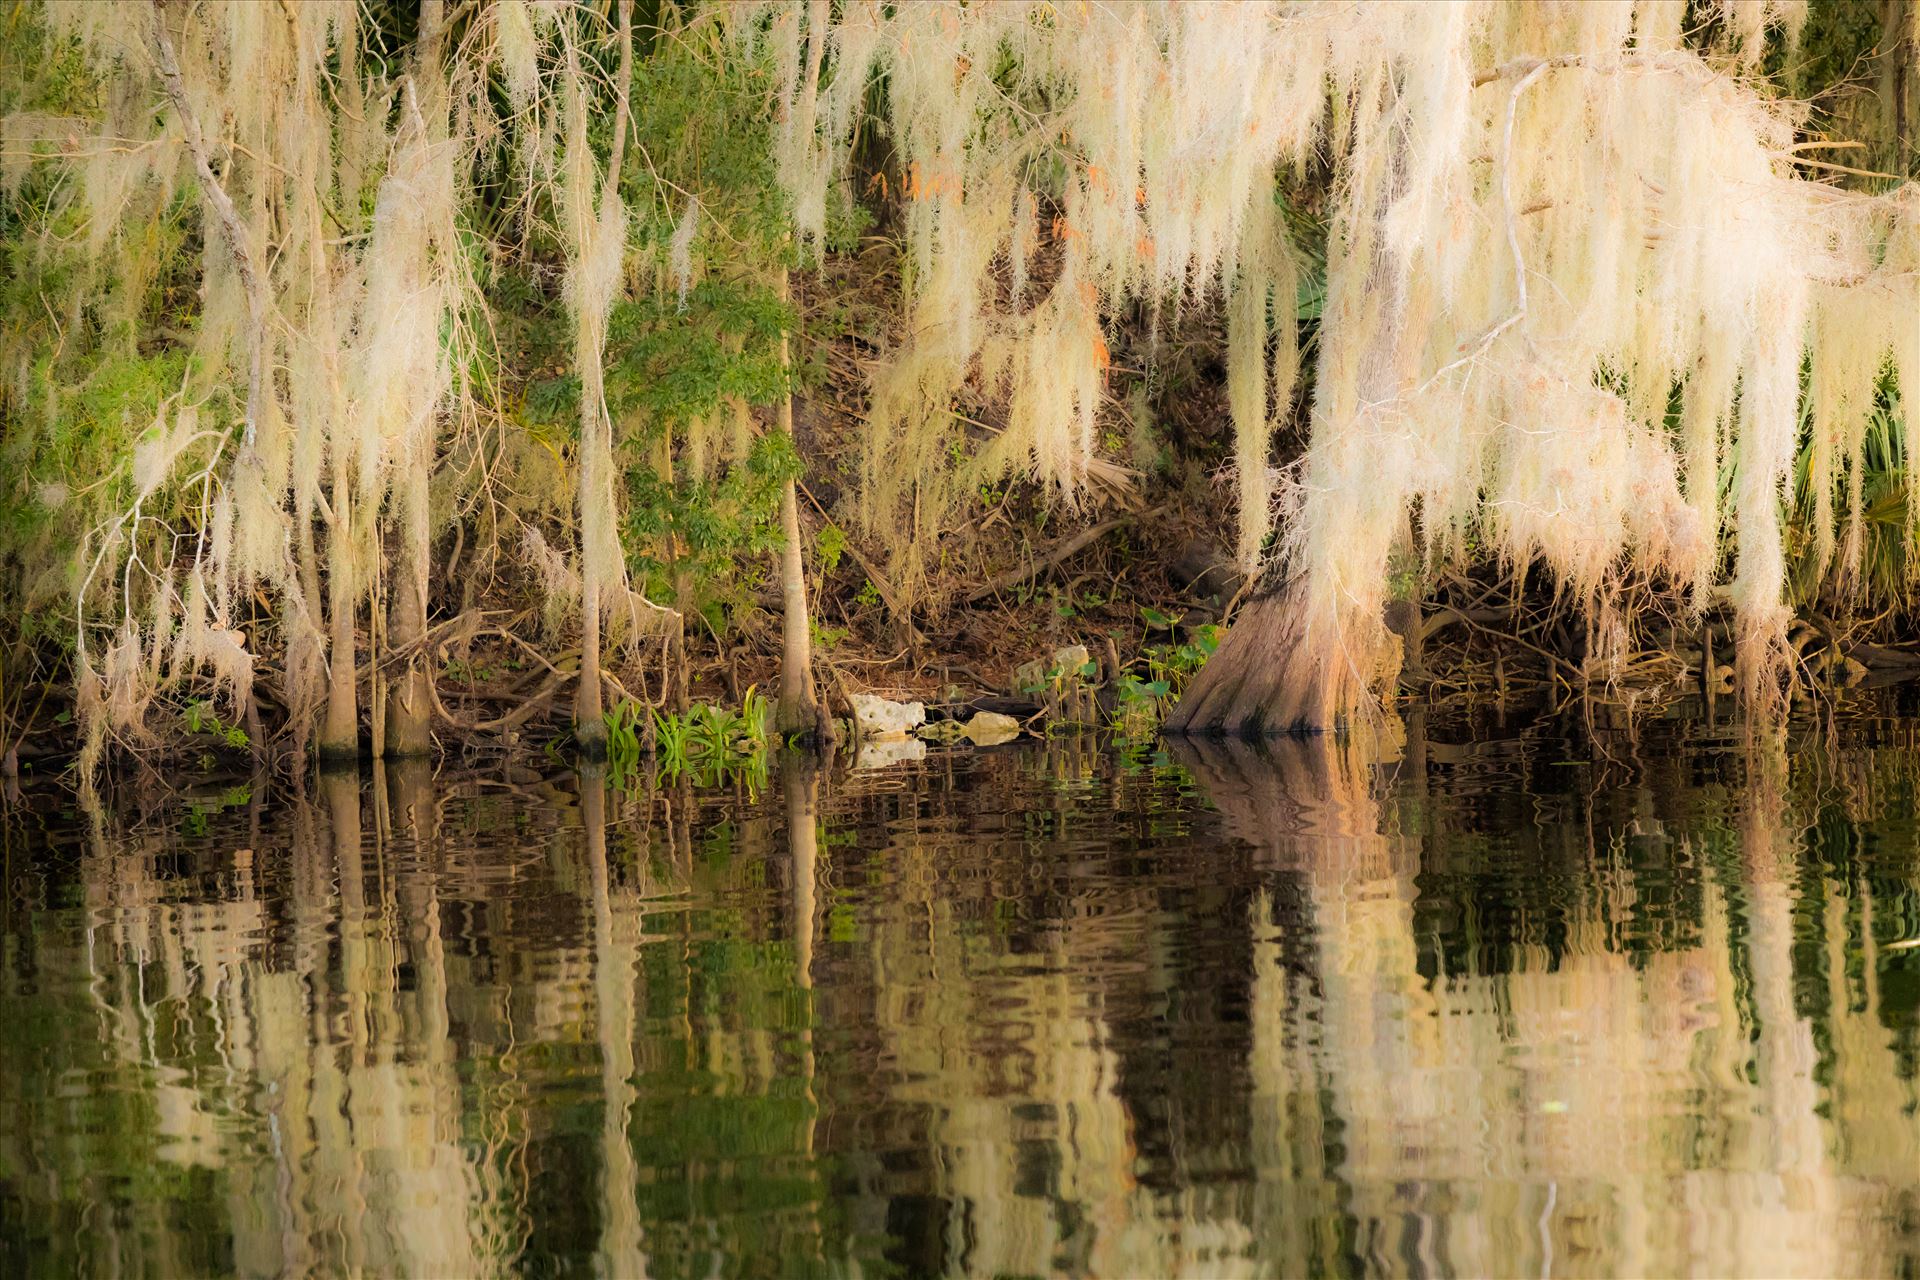 Reflections-2.jpg - Water reflection in swamp of the St John's River, Florida by Cat Cornish Photography